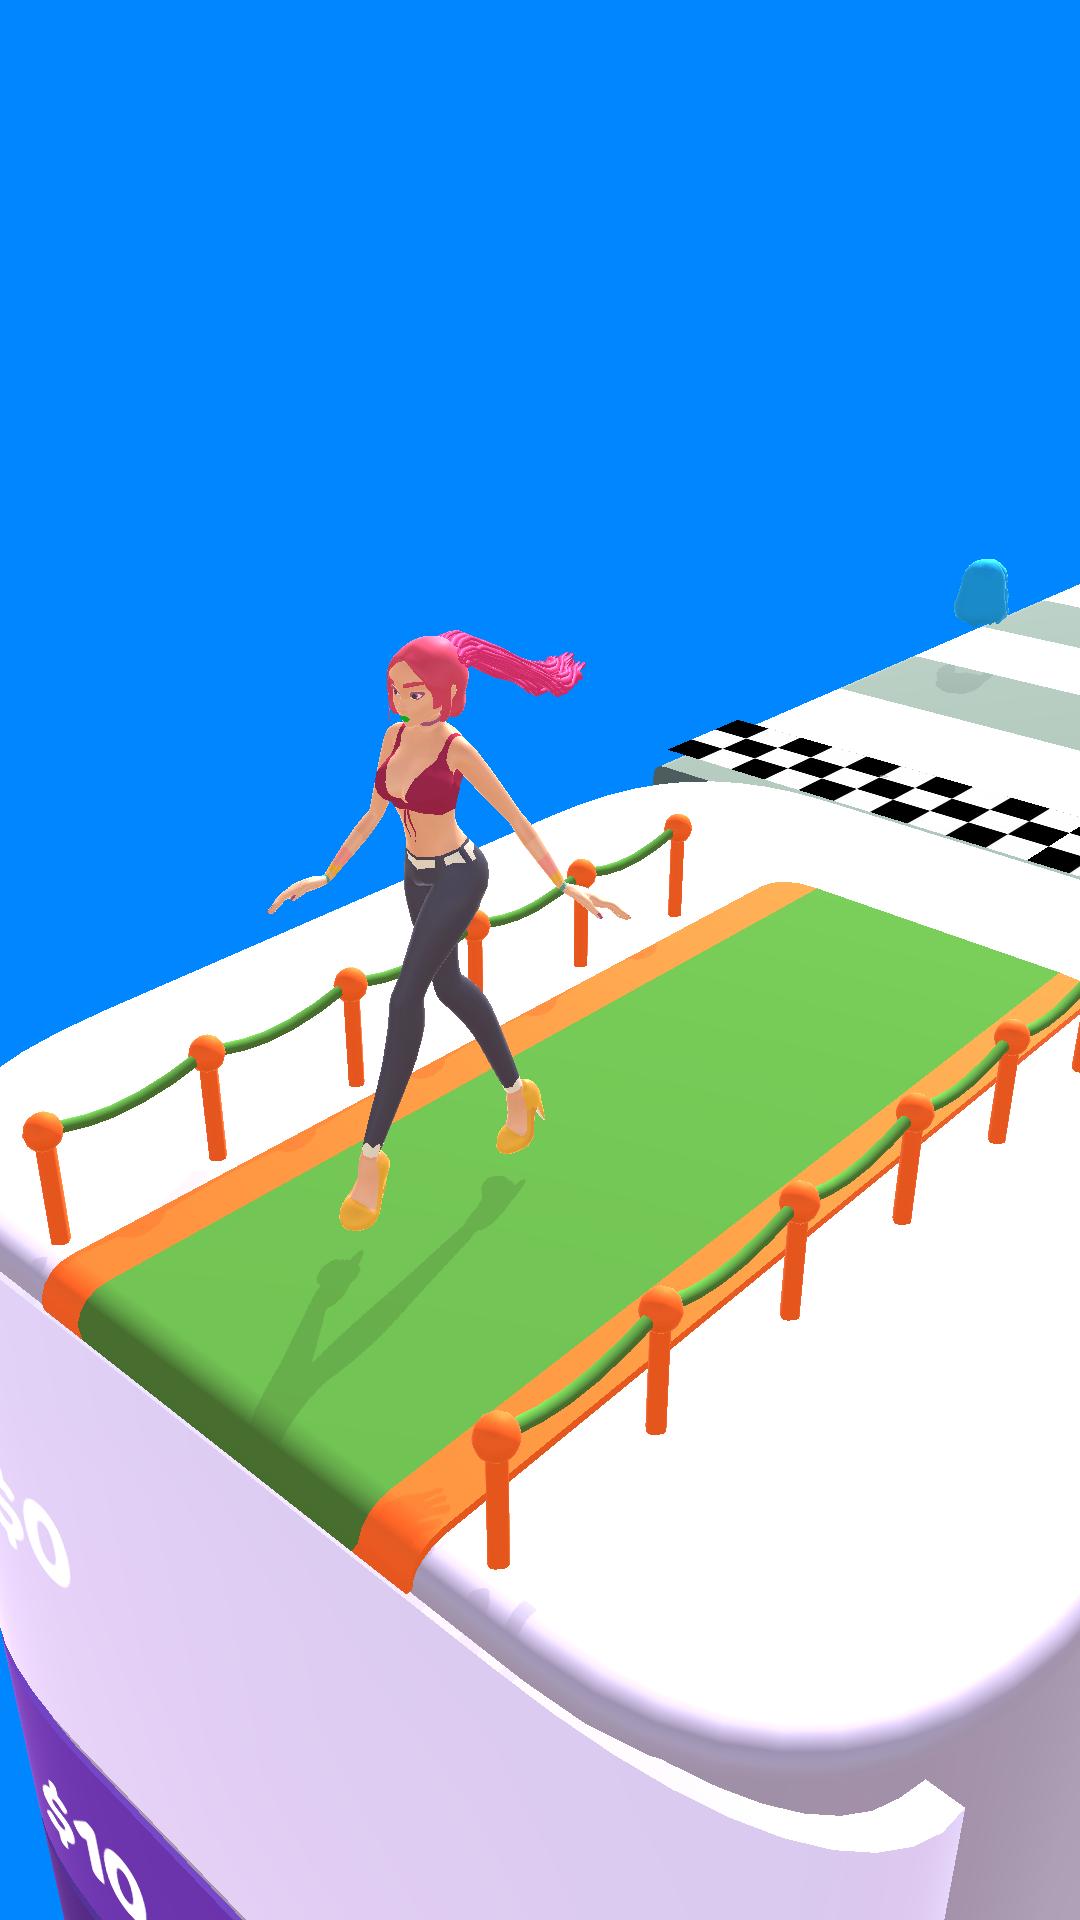 Hair Challenge rush runner makeover run 3d game for Android - APK Download